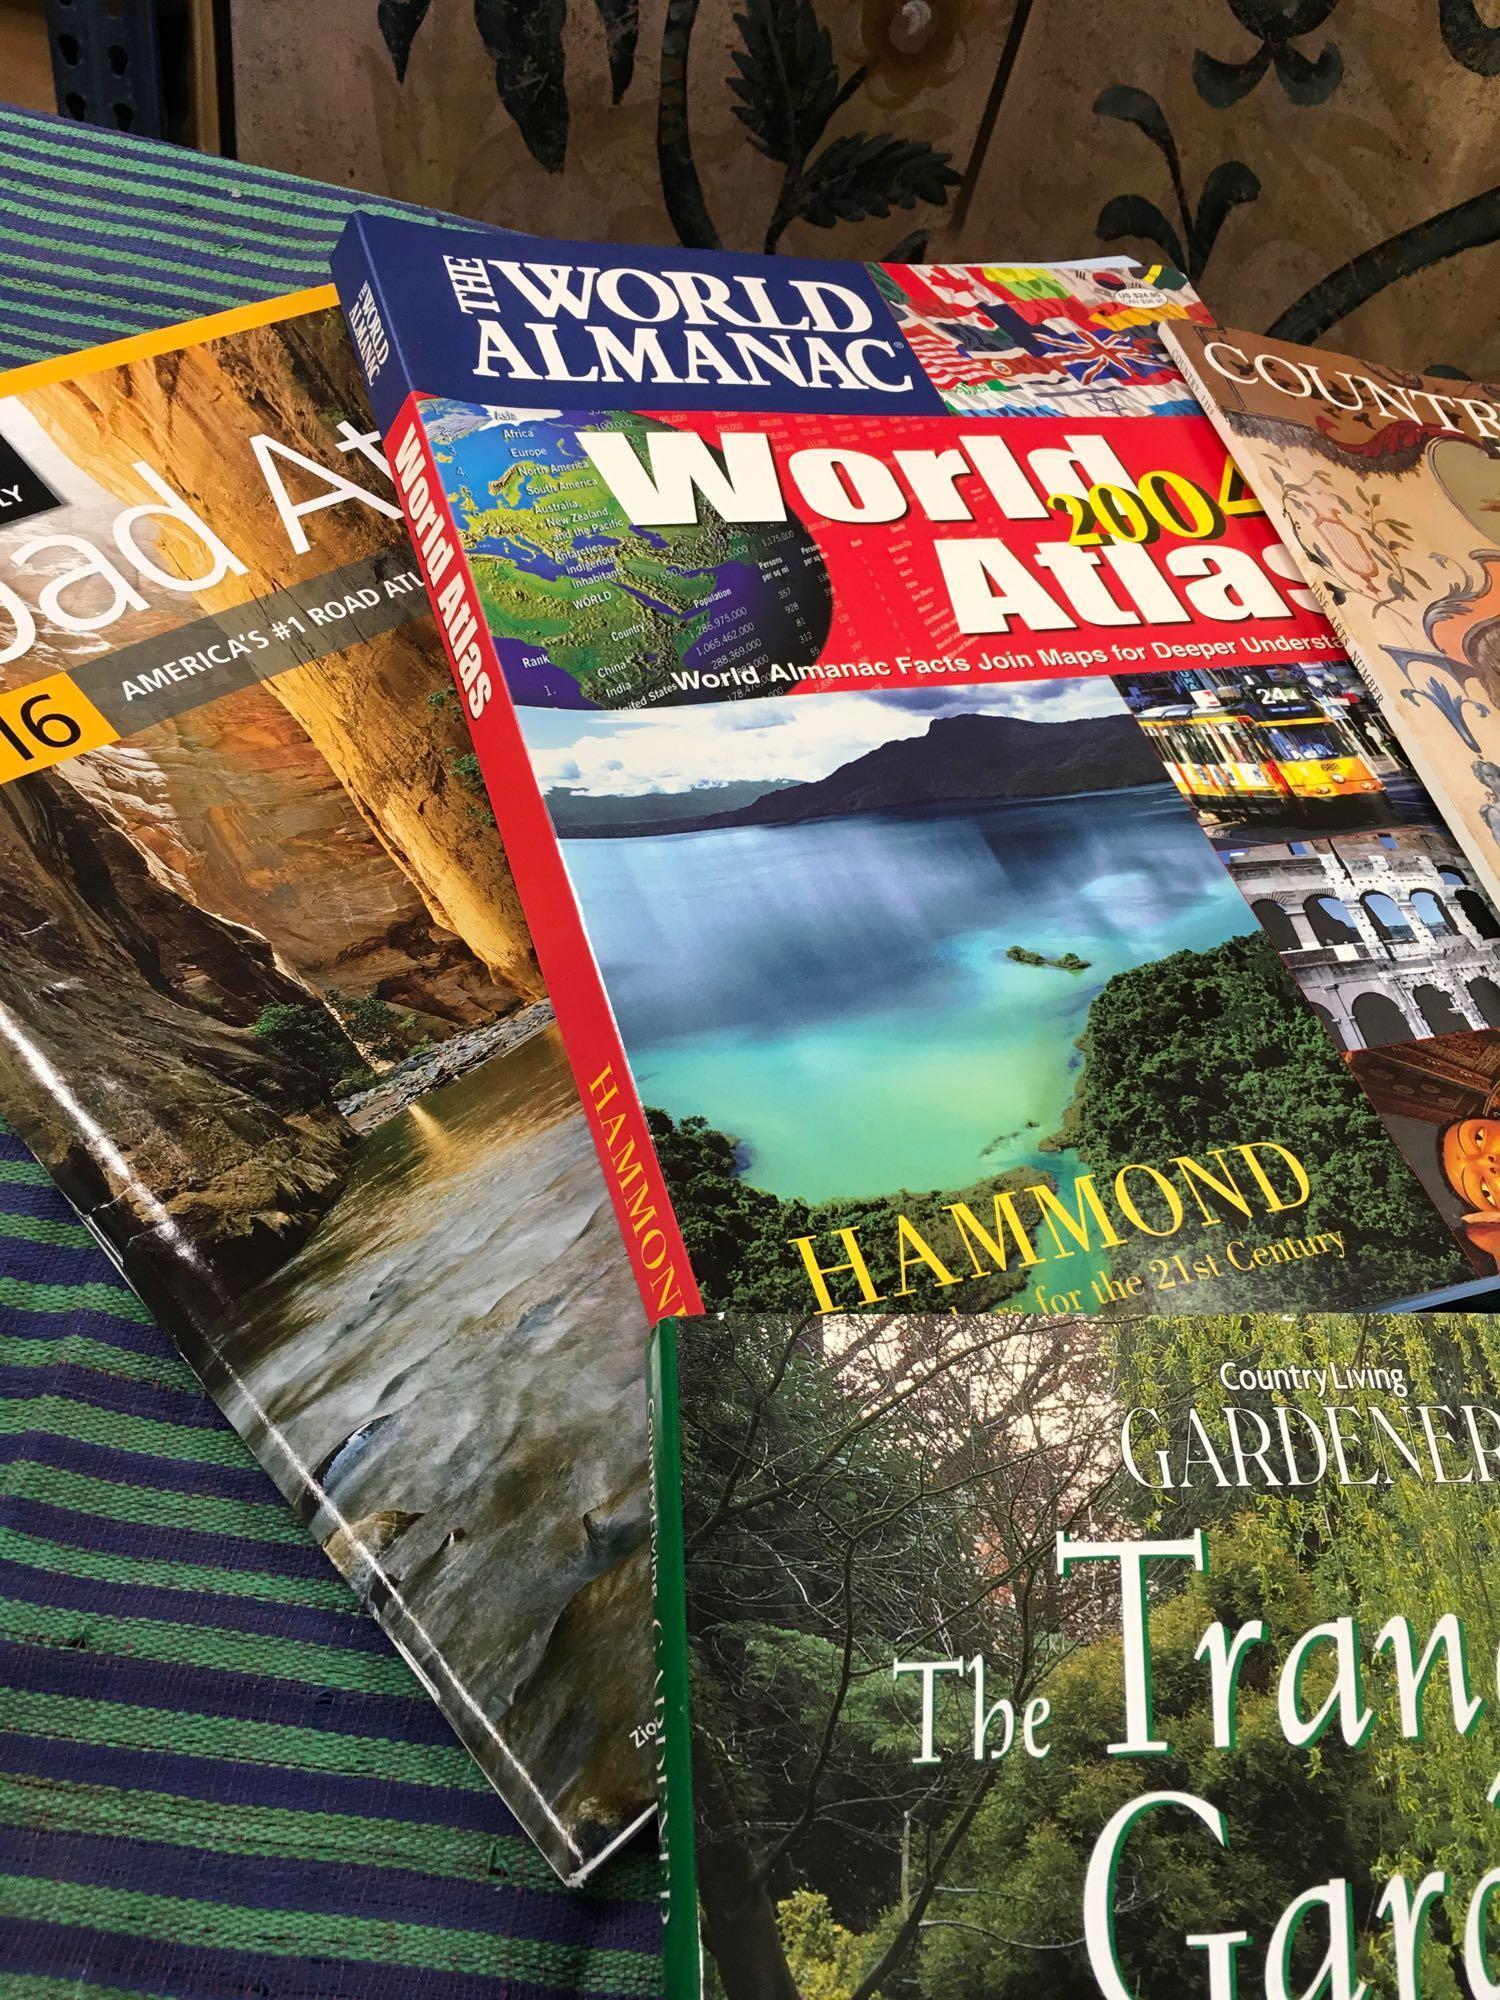 7 pieces. 2016 Road Atlas, 2004 World Atlas, Country Life, The Random House Dictionary, The Tranquil